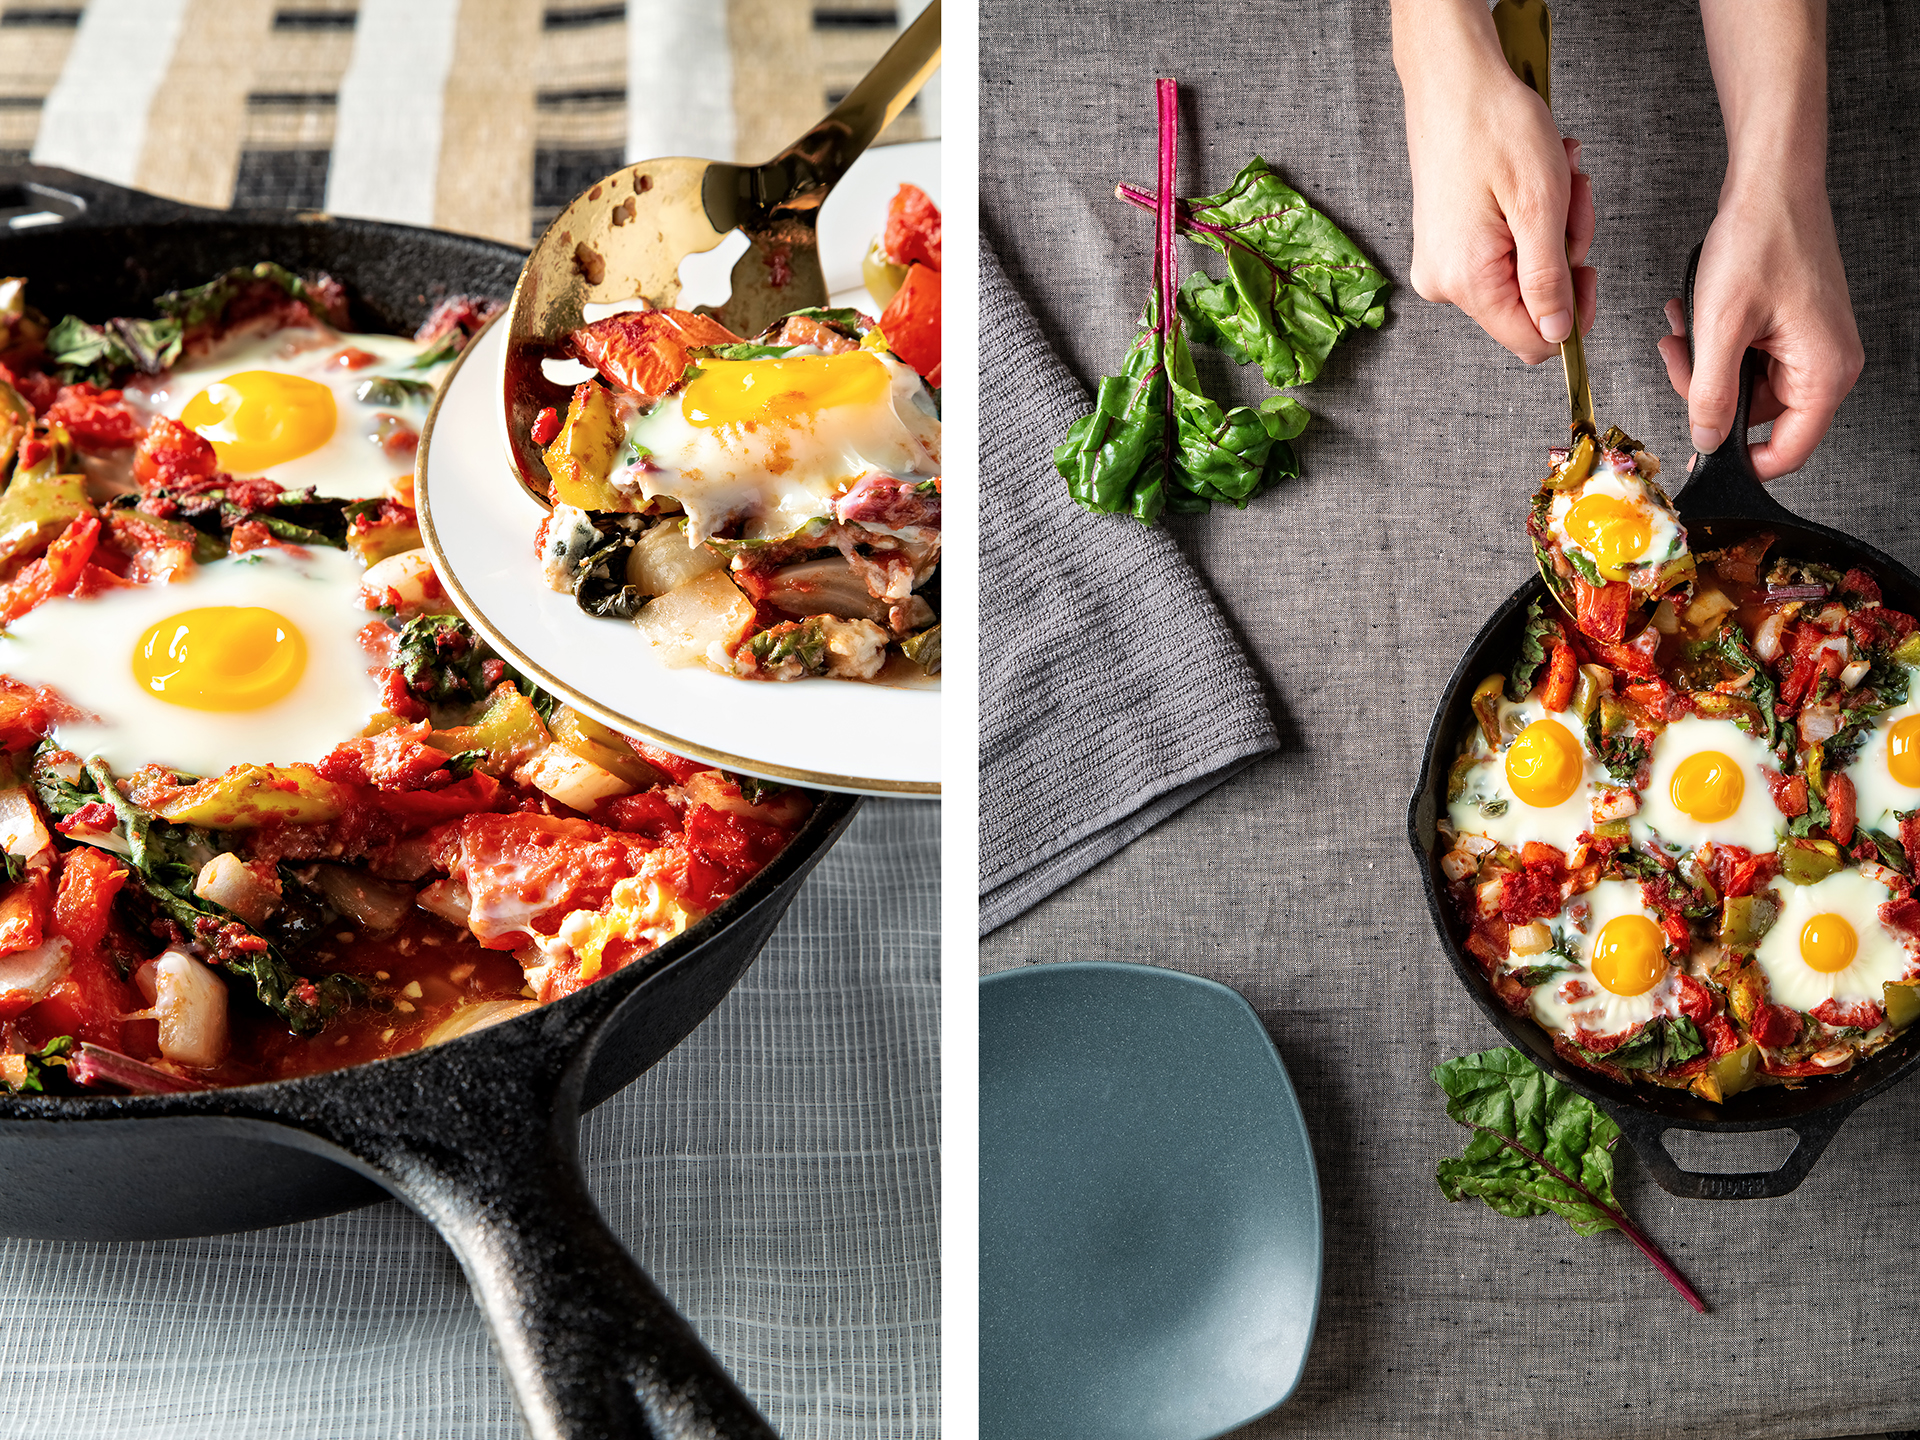 Pan of shakshuka with eggs and vegetables